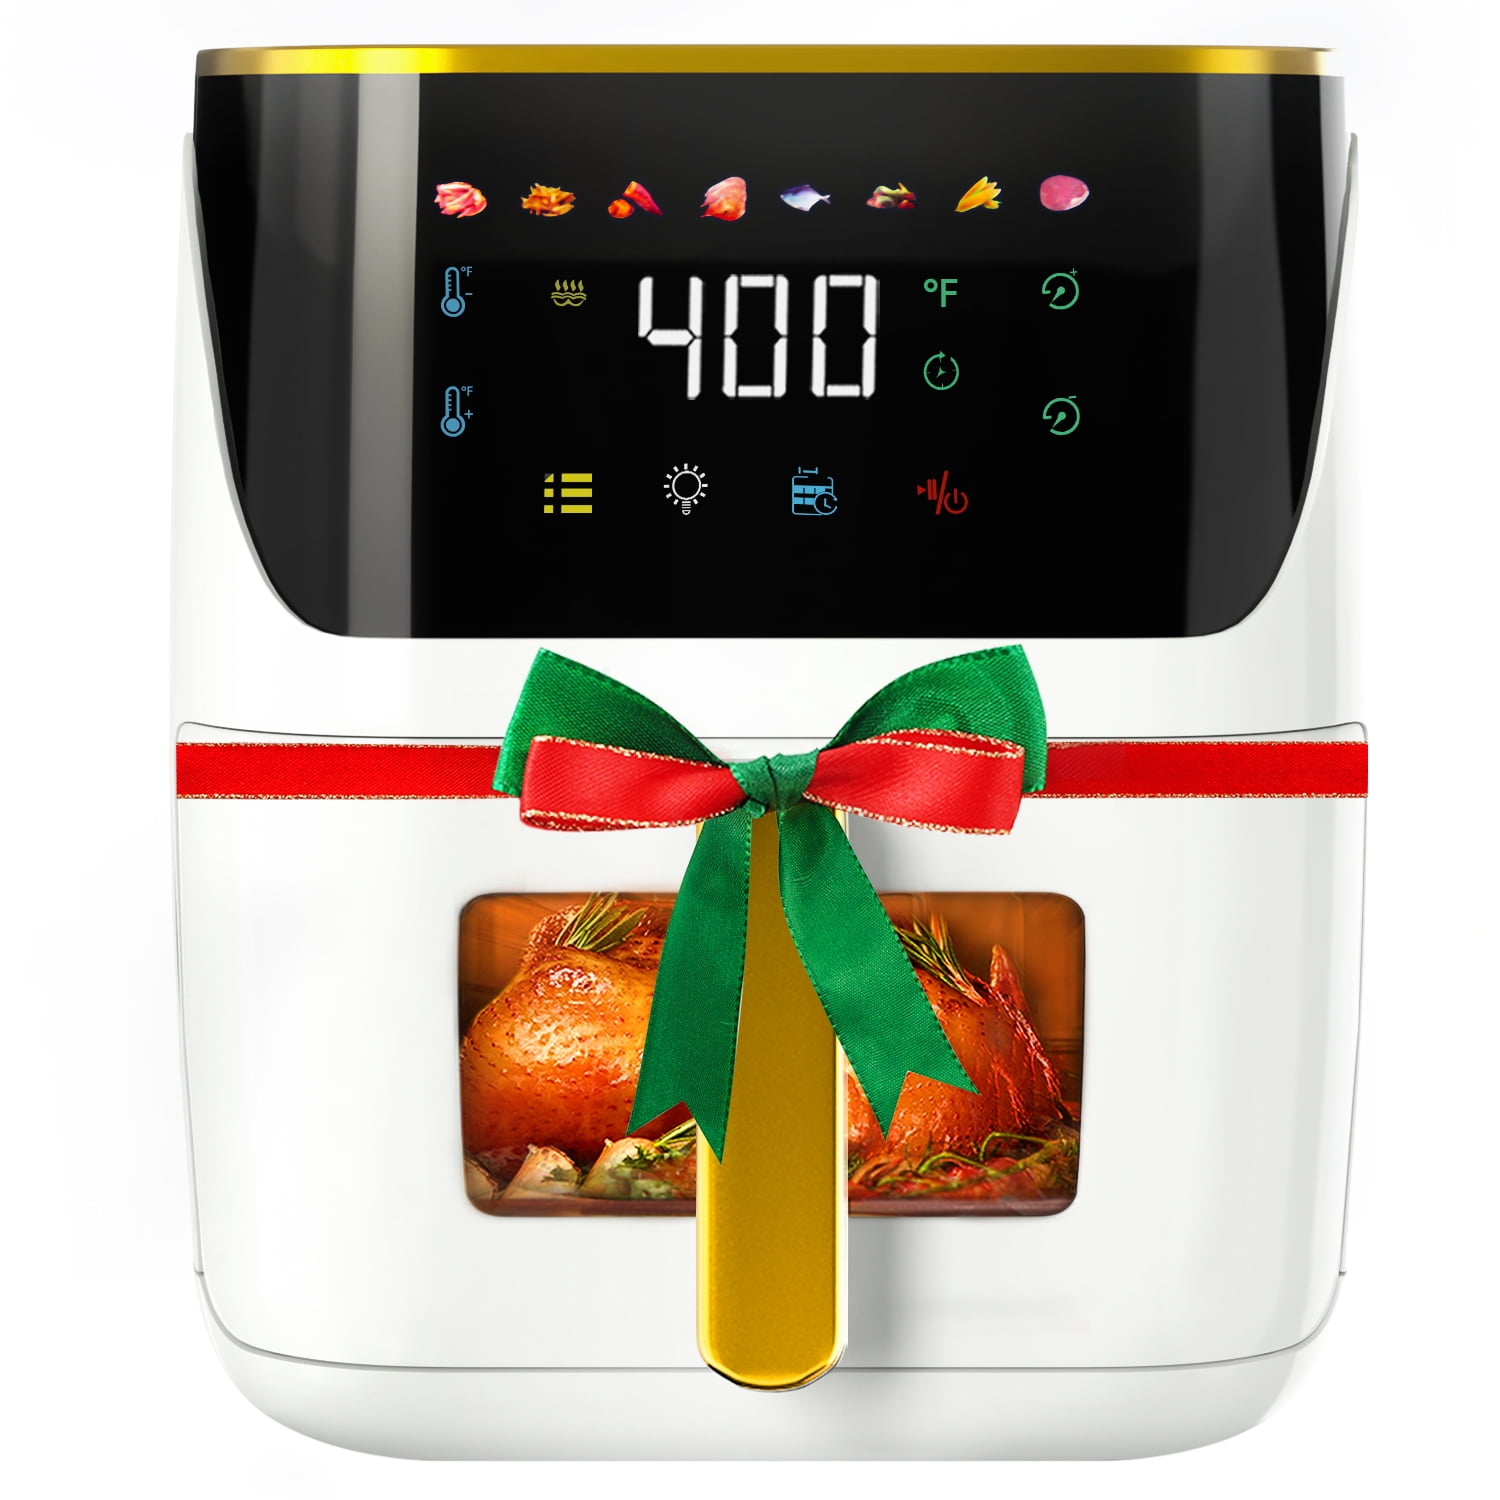 Newest Air Fryer Large 8.5 qt, Green, 8 in 1 Touch Screen, Visible Window, 1750W